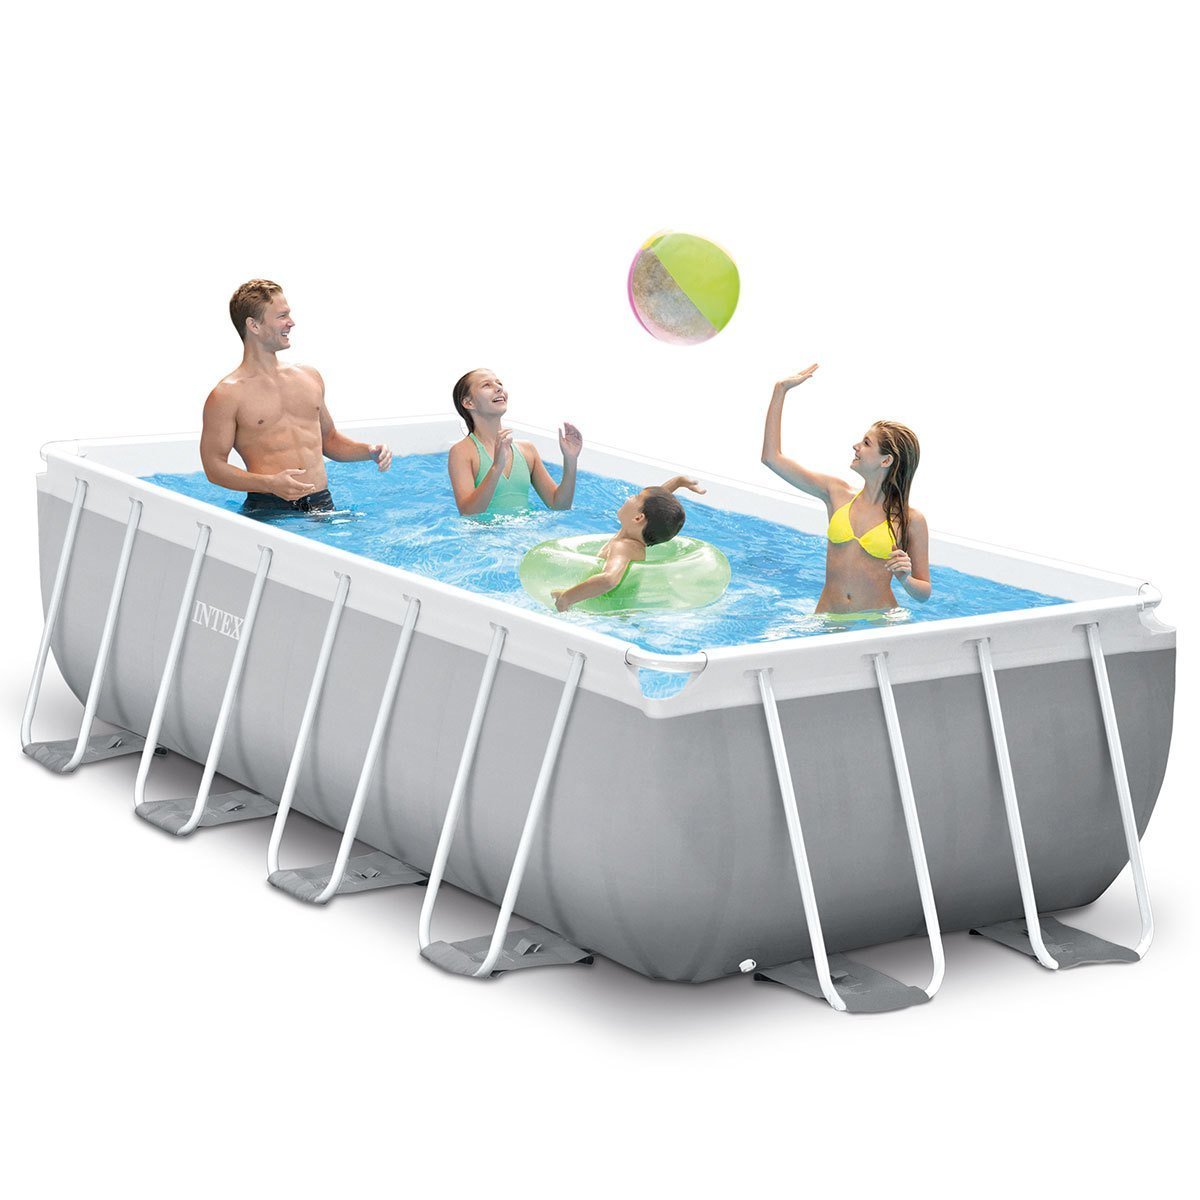 Intex 13ft 1.5" (4m) Rectangular Prism Frame Pool with Filter Pump and Ladder - Signature Retail Stores